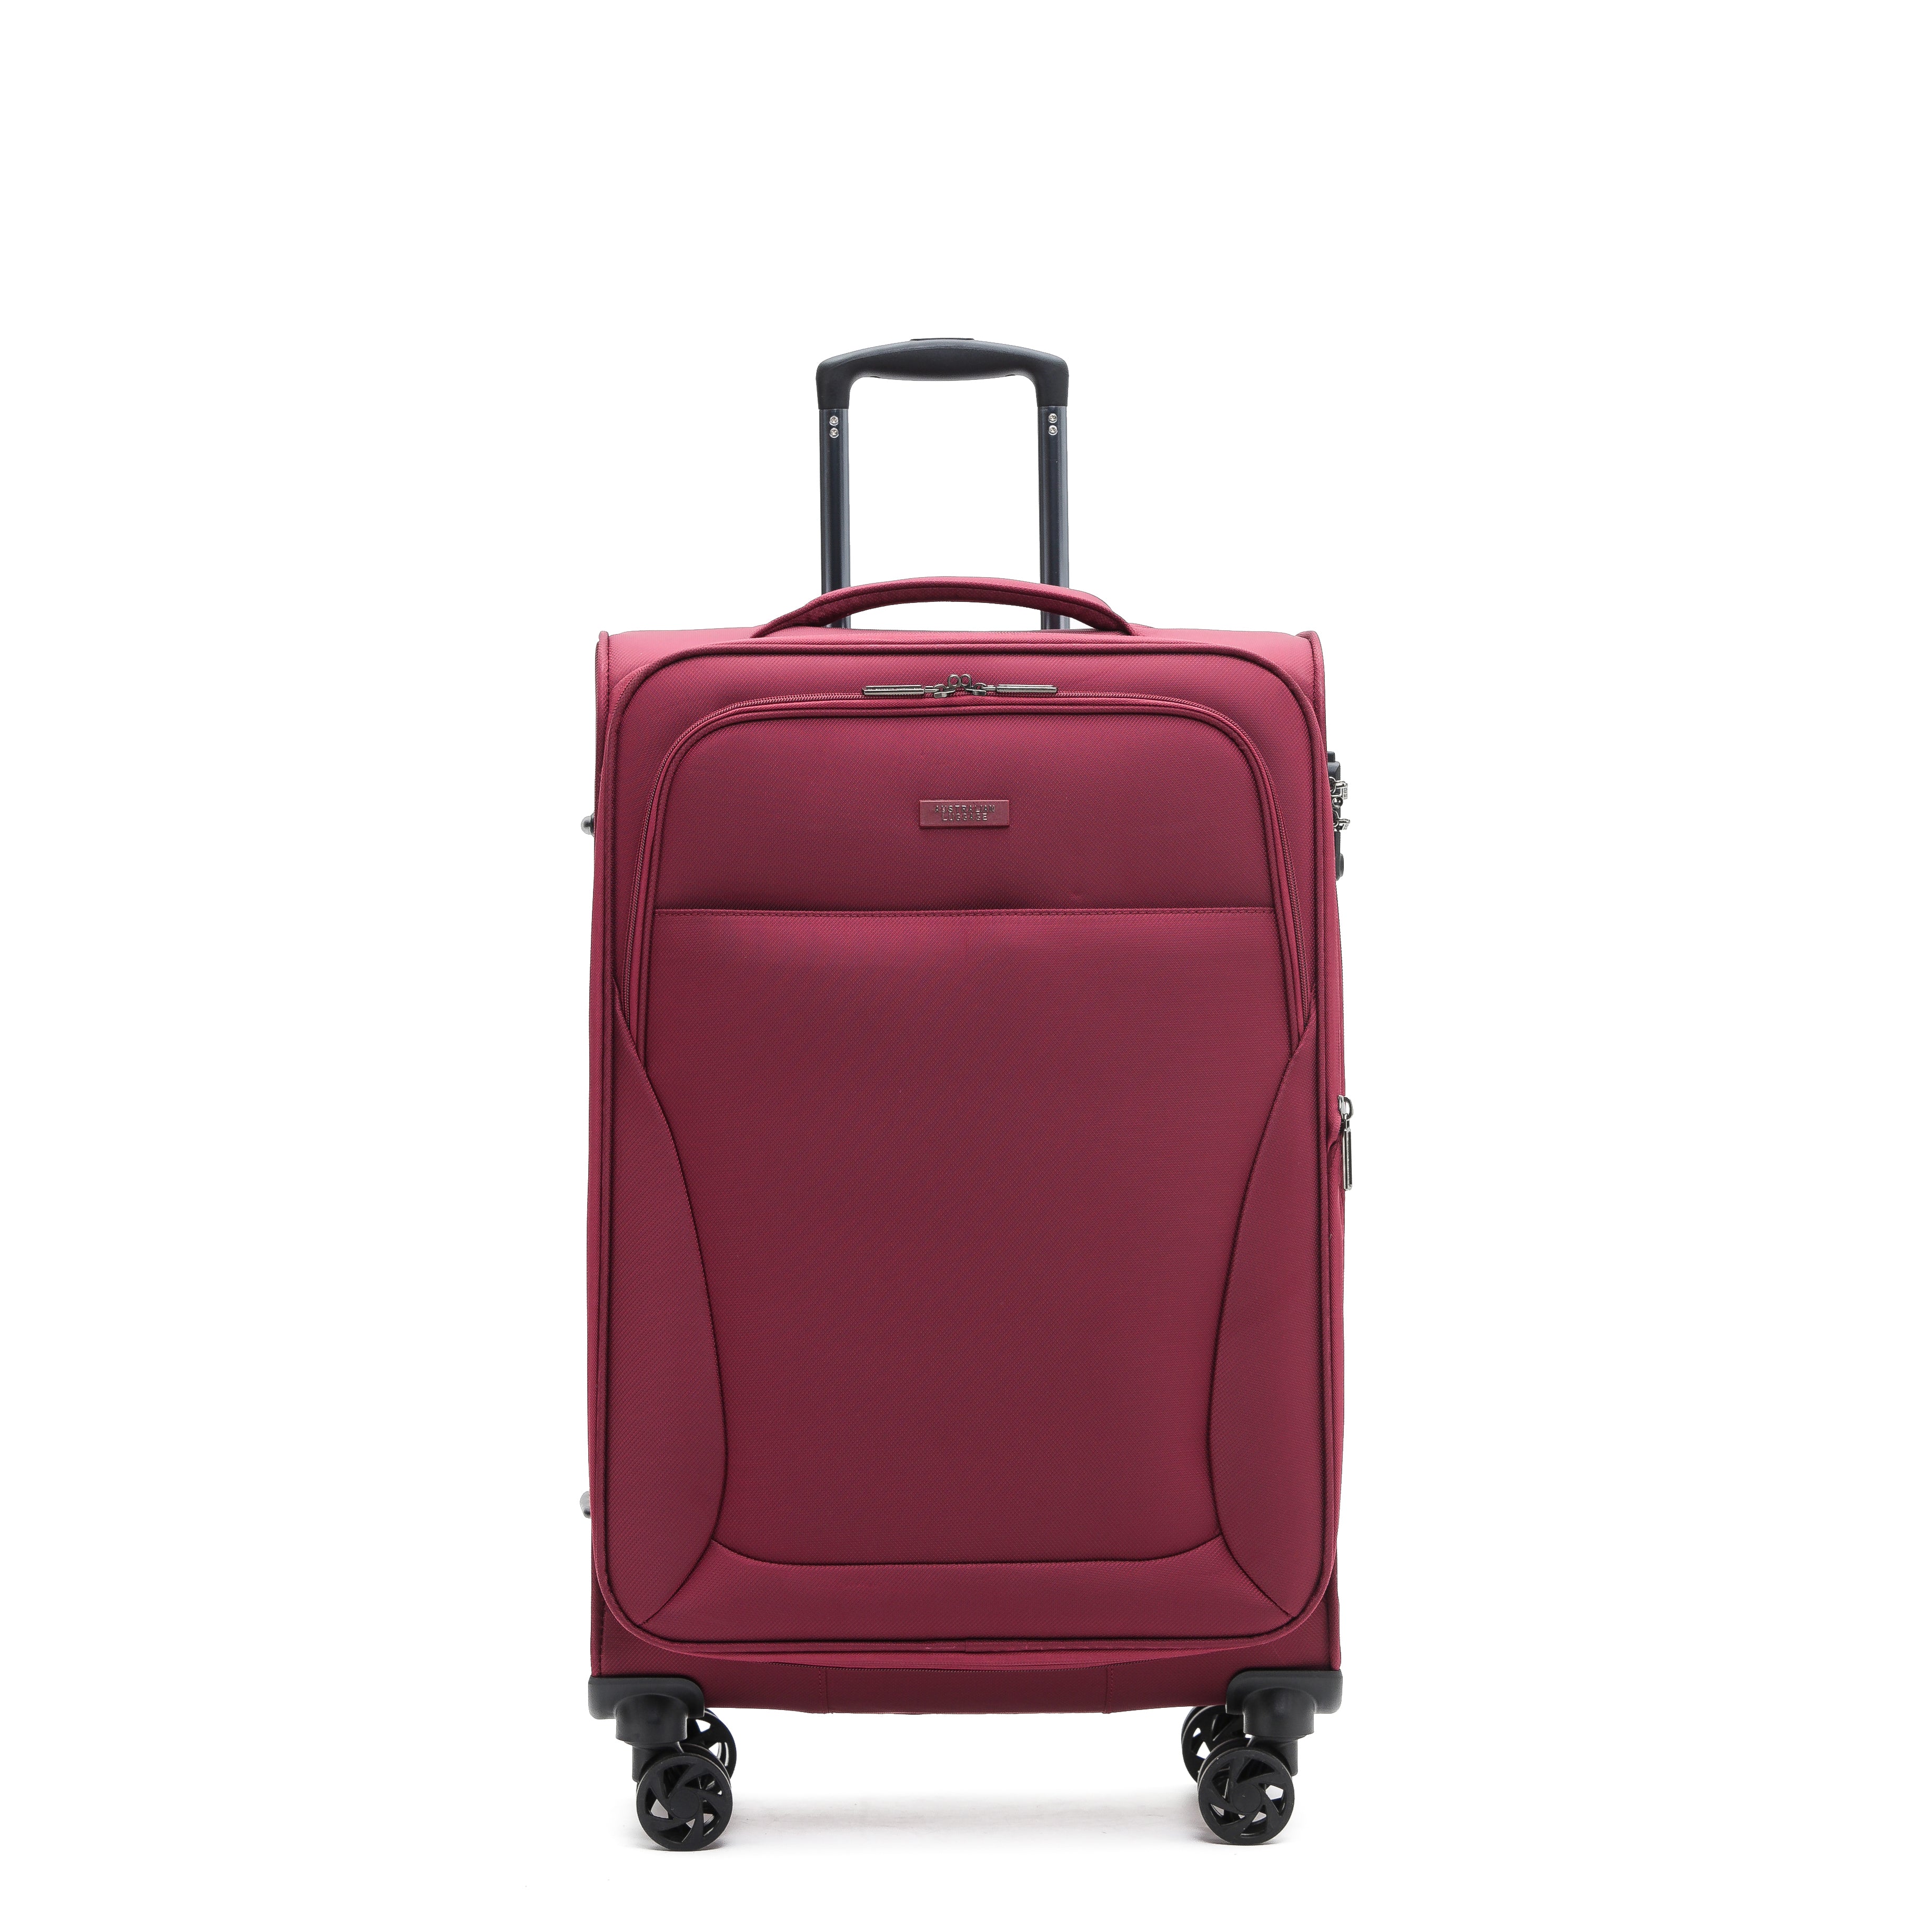 AUS LUGGAGE - WINGS Trolley Case 29in Large - Wine